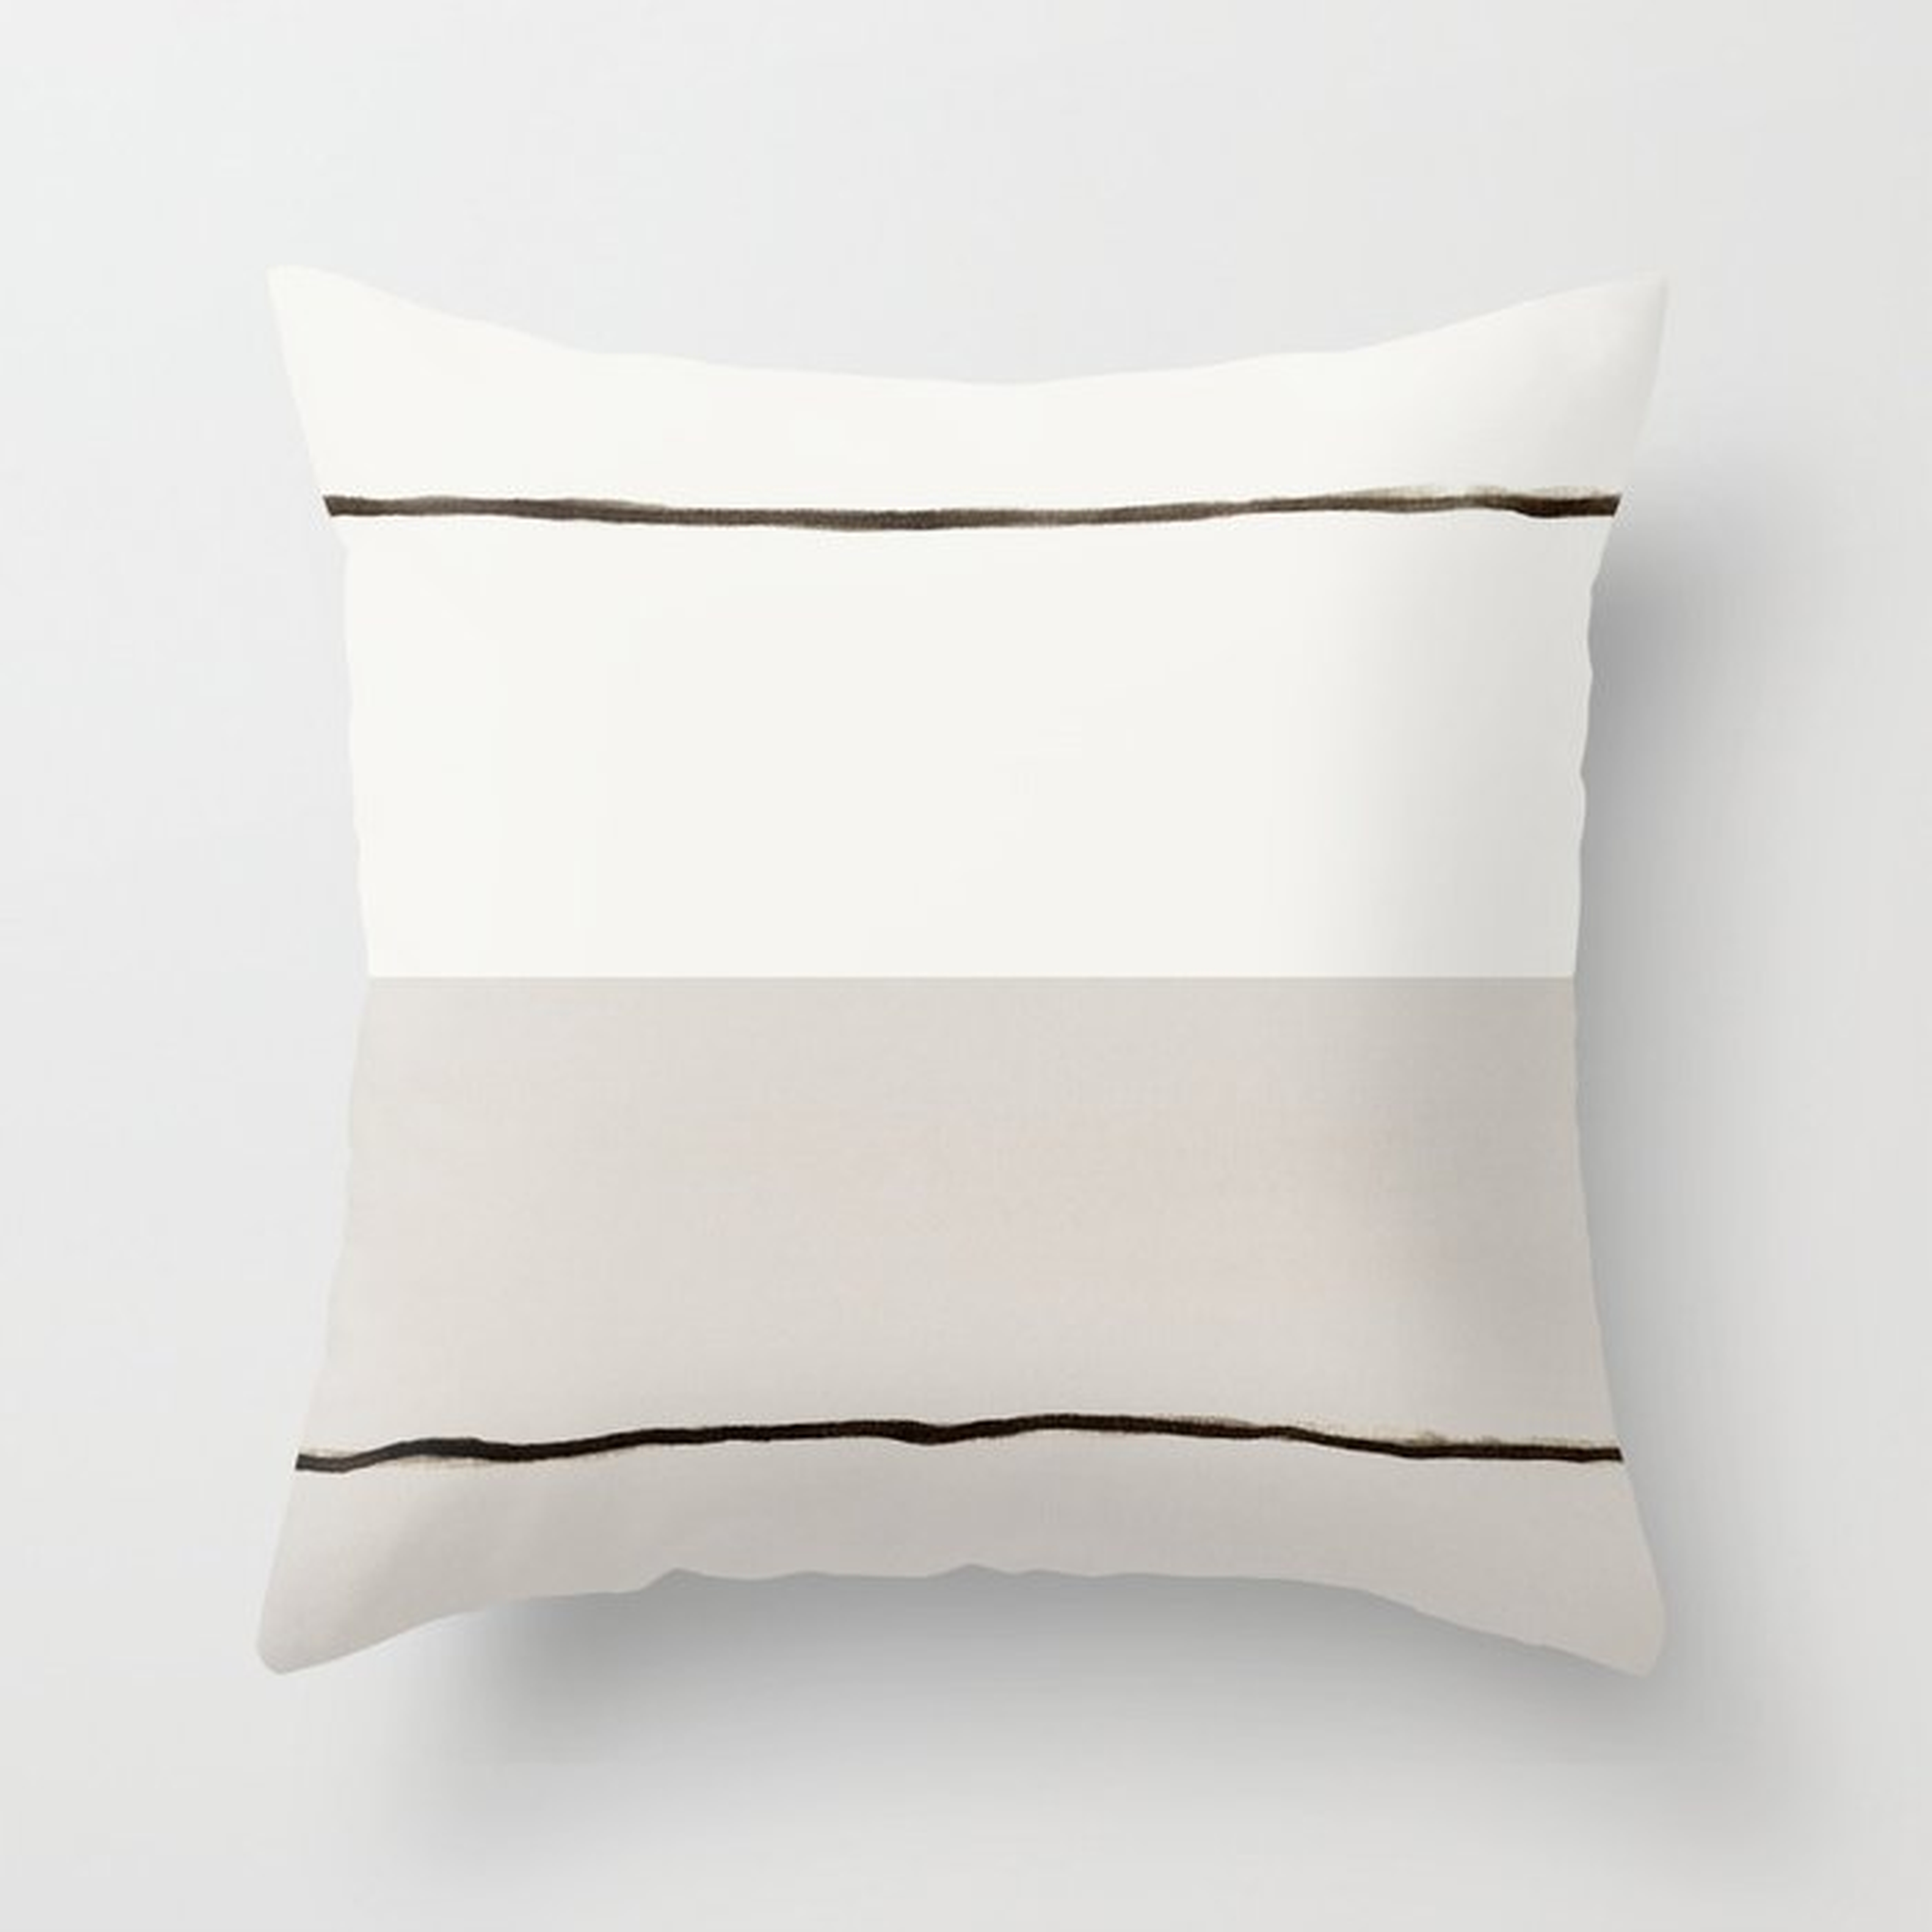 Minimal Space 03 Couch Throw Pillow by Georgiana Paraschiv - Cover (20" x 20") with pillow insert - Outdoor Pillow - Society6